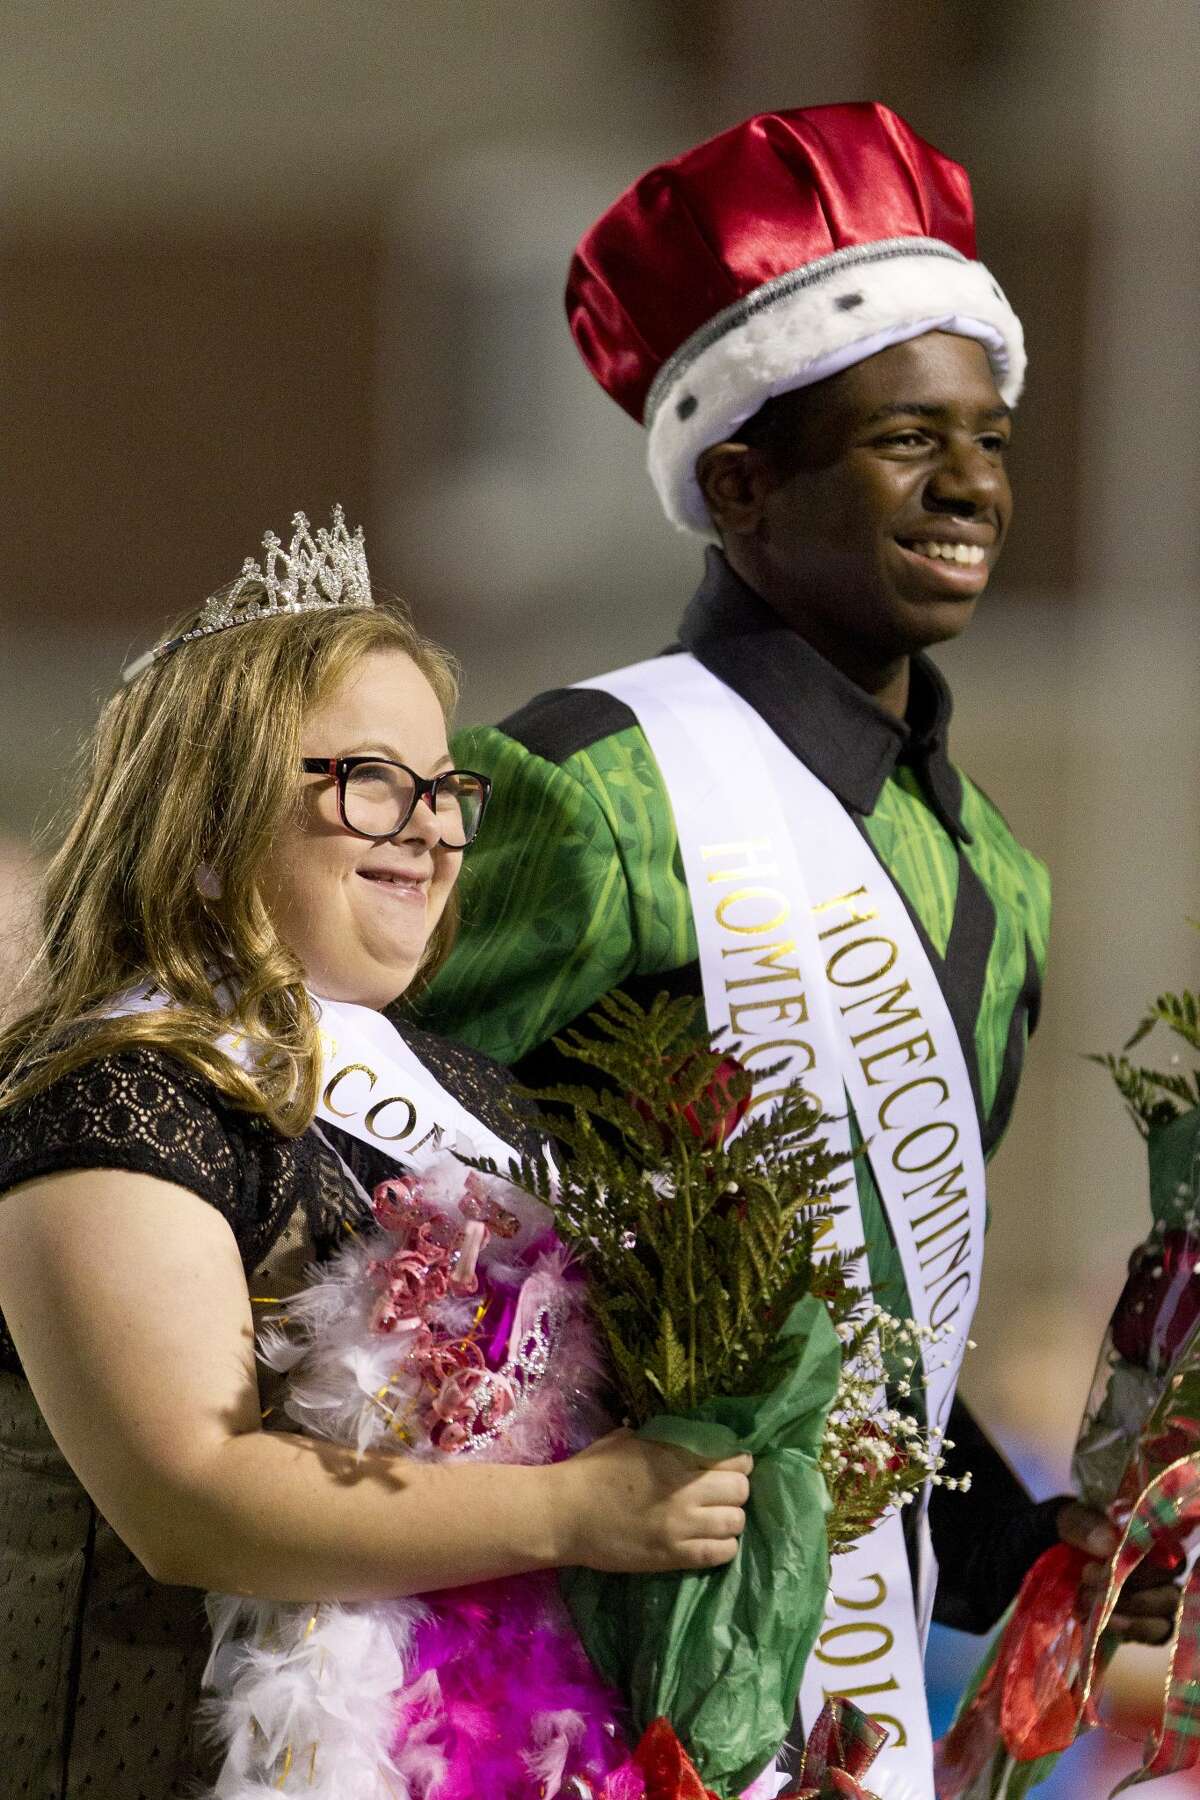 Click through the slideshow to see the Houston area's homecoming royalty for 2016.  Homecoming queen Hanna Pasch, left, is seen with homecoming king Shabach Khoza during halftime of The Woodlands High School's football game against Montgomery Friday, Oct. 28, 2016.